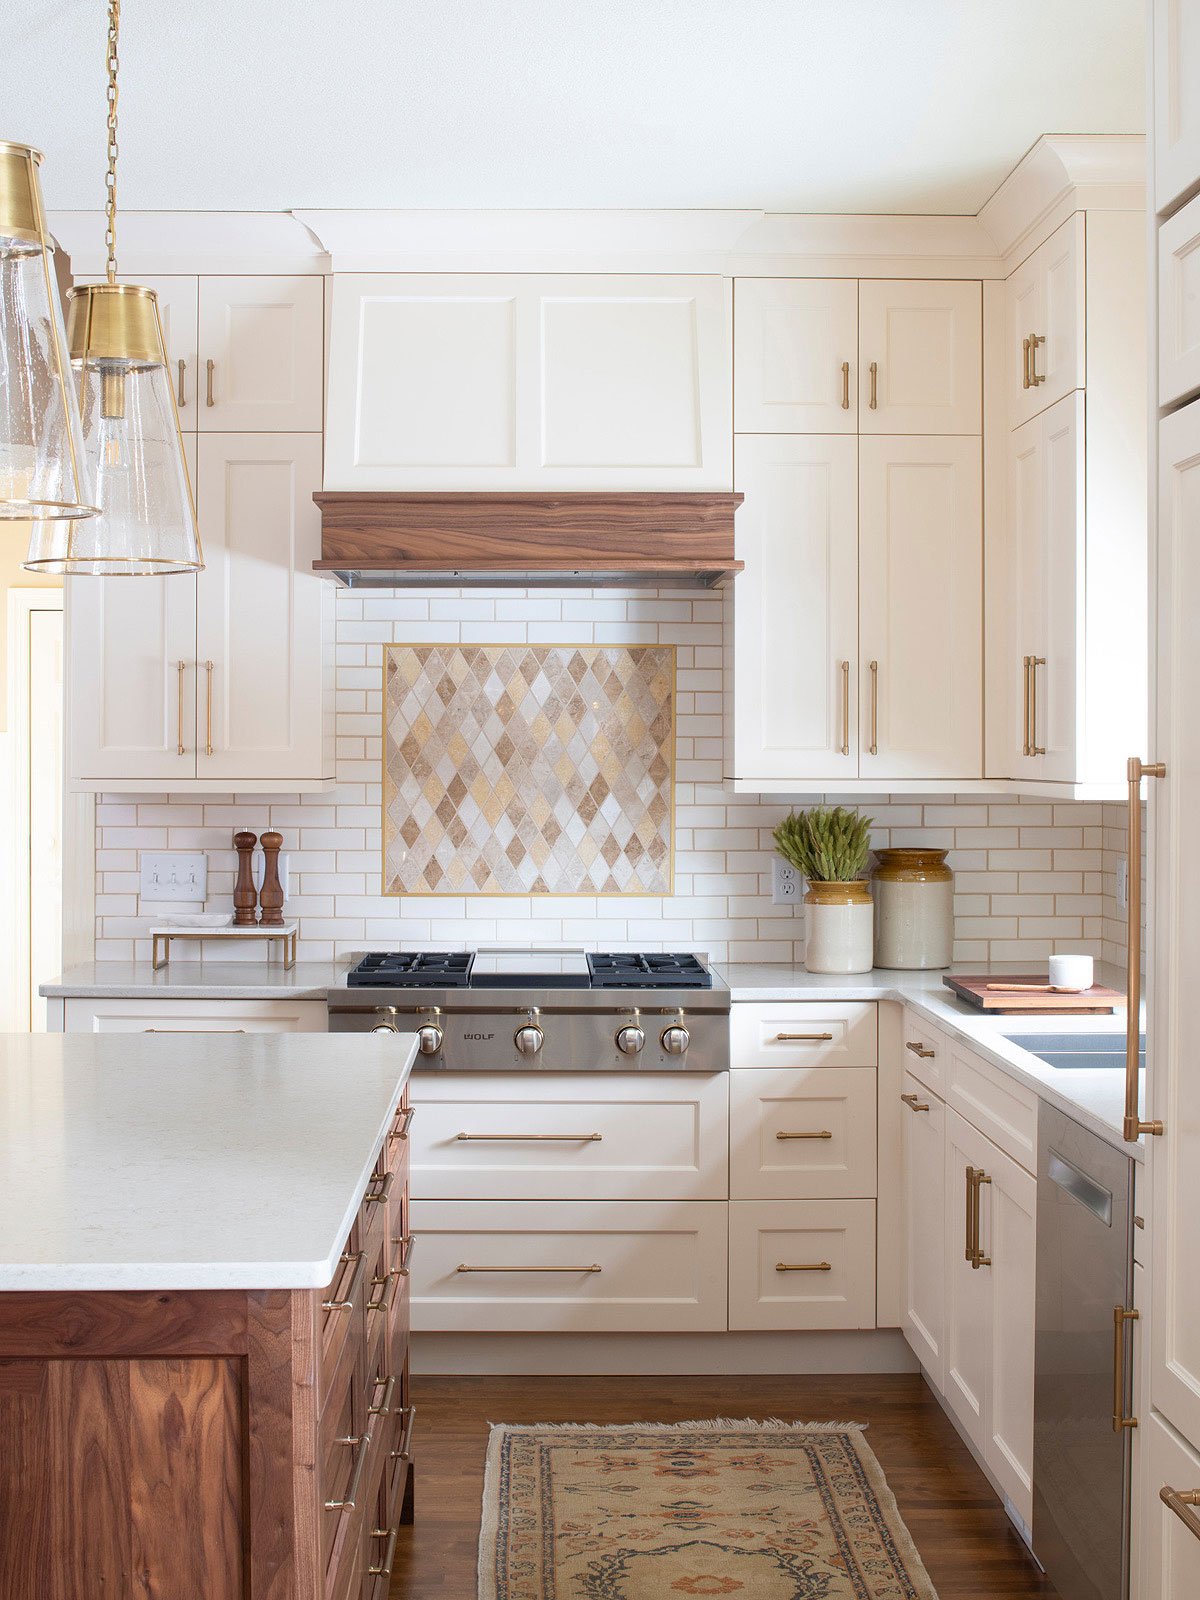 http://www.nikkisplate.com/wp-content/uploads/2022/06/White-Kitchen-Cabinets-with-Brass-Hardware-.jpeg